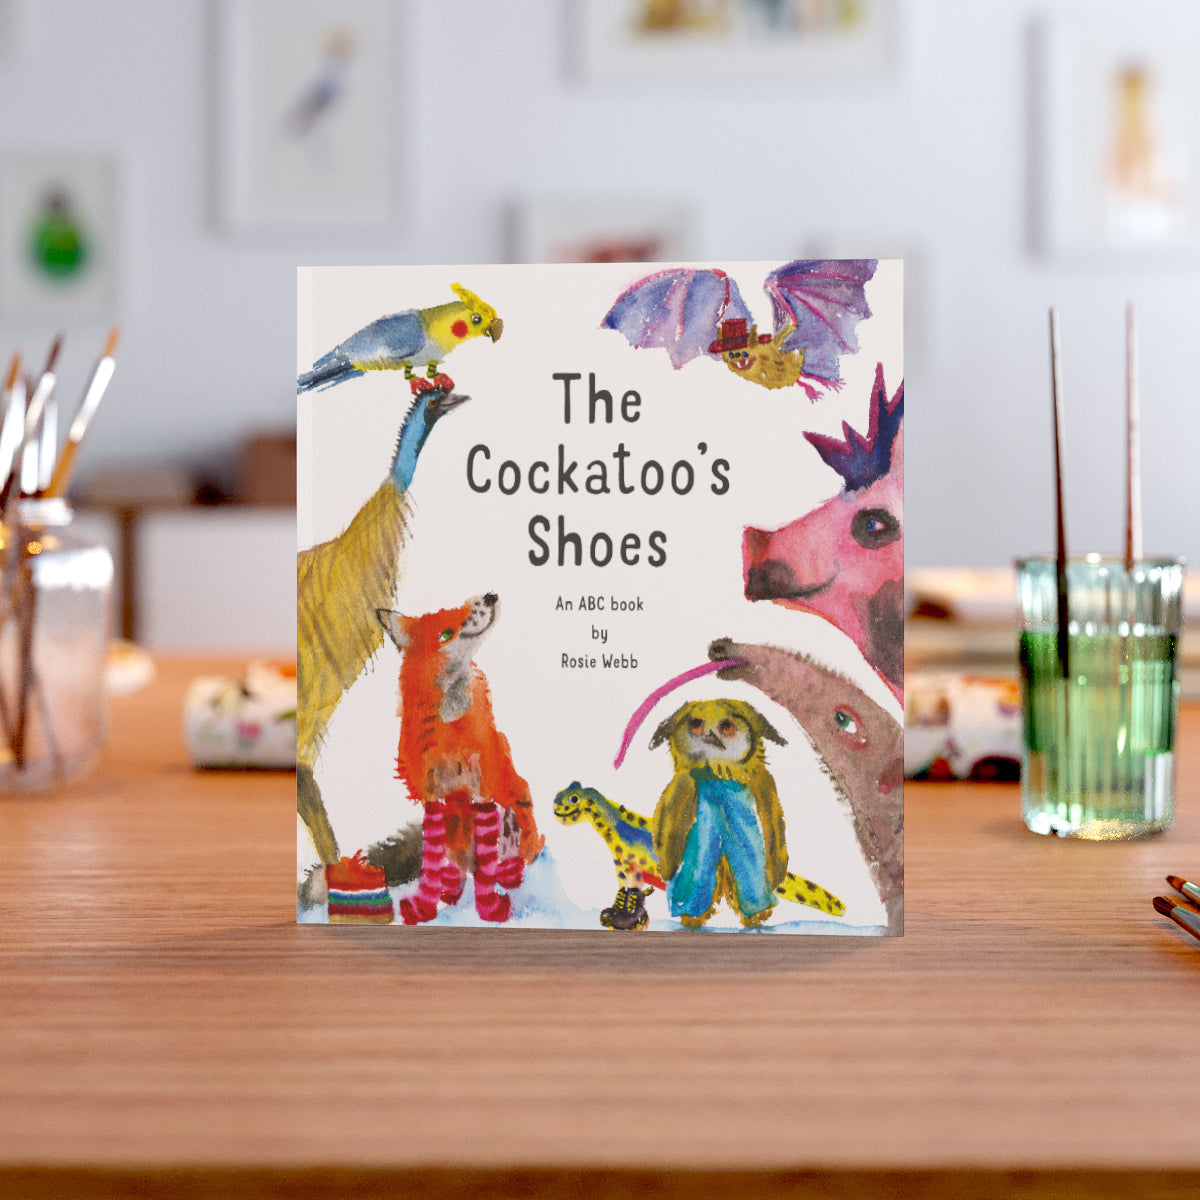 The Cockatoo's Shoes